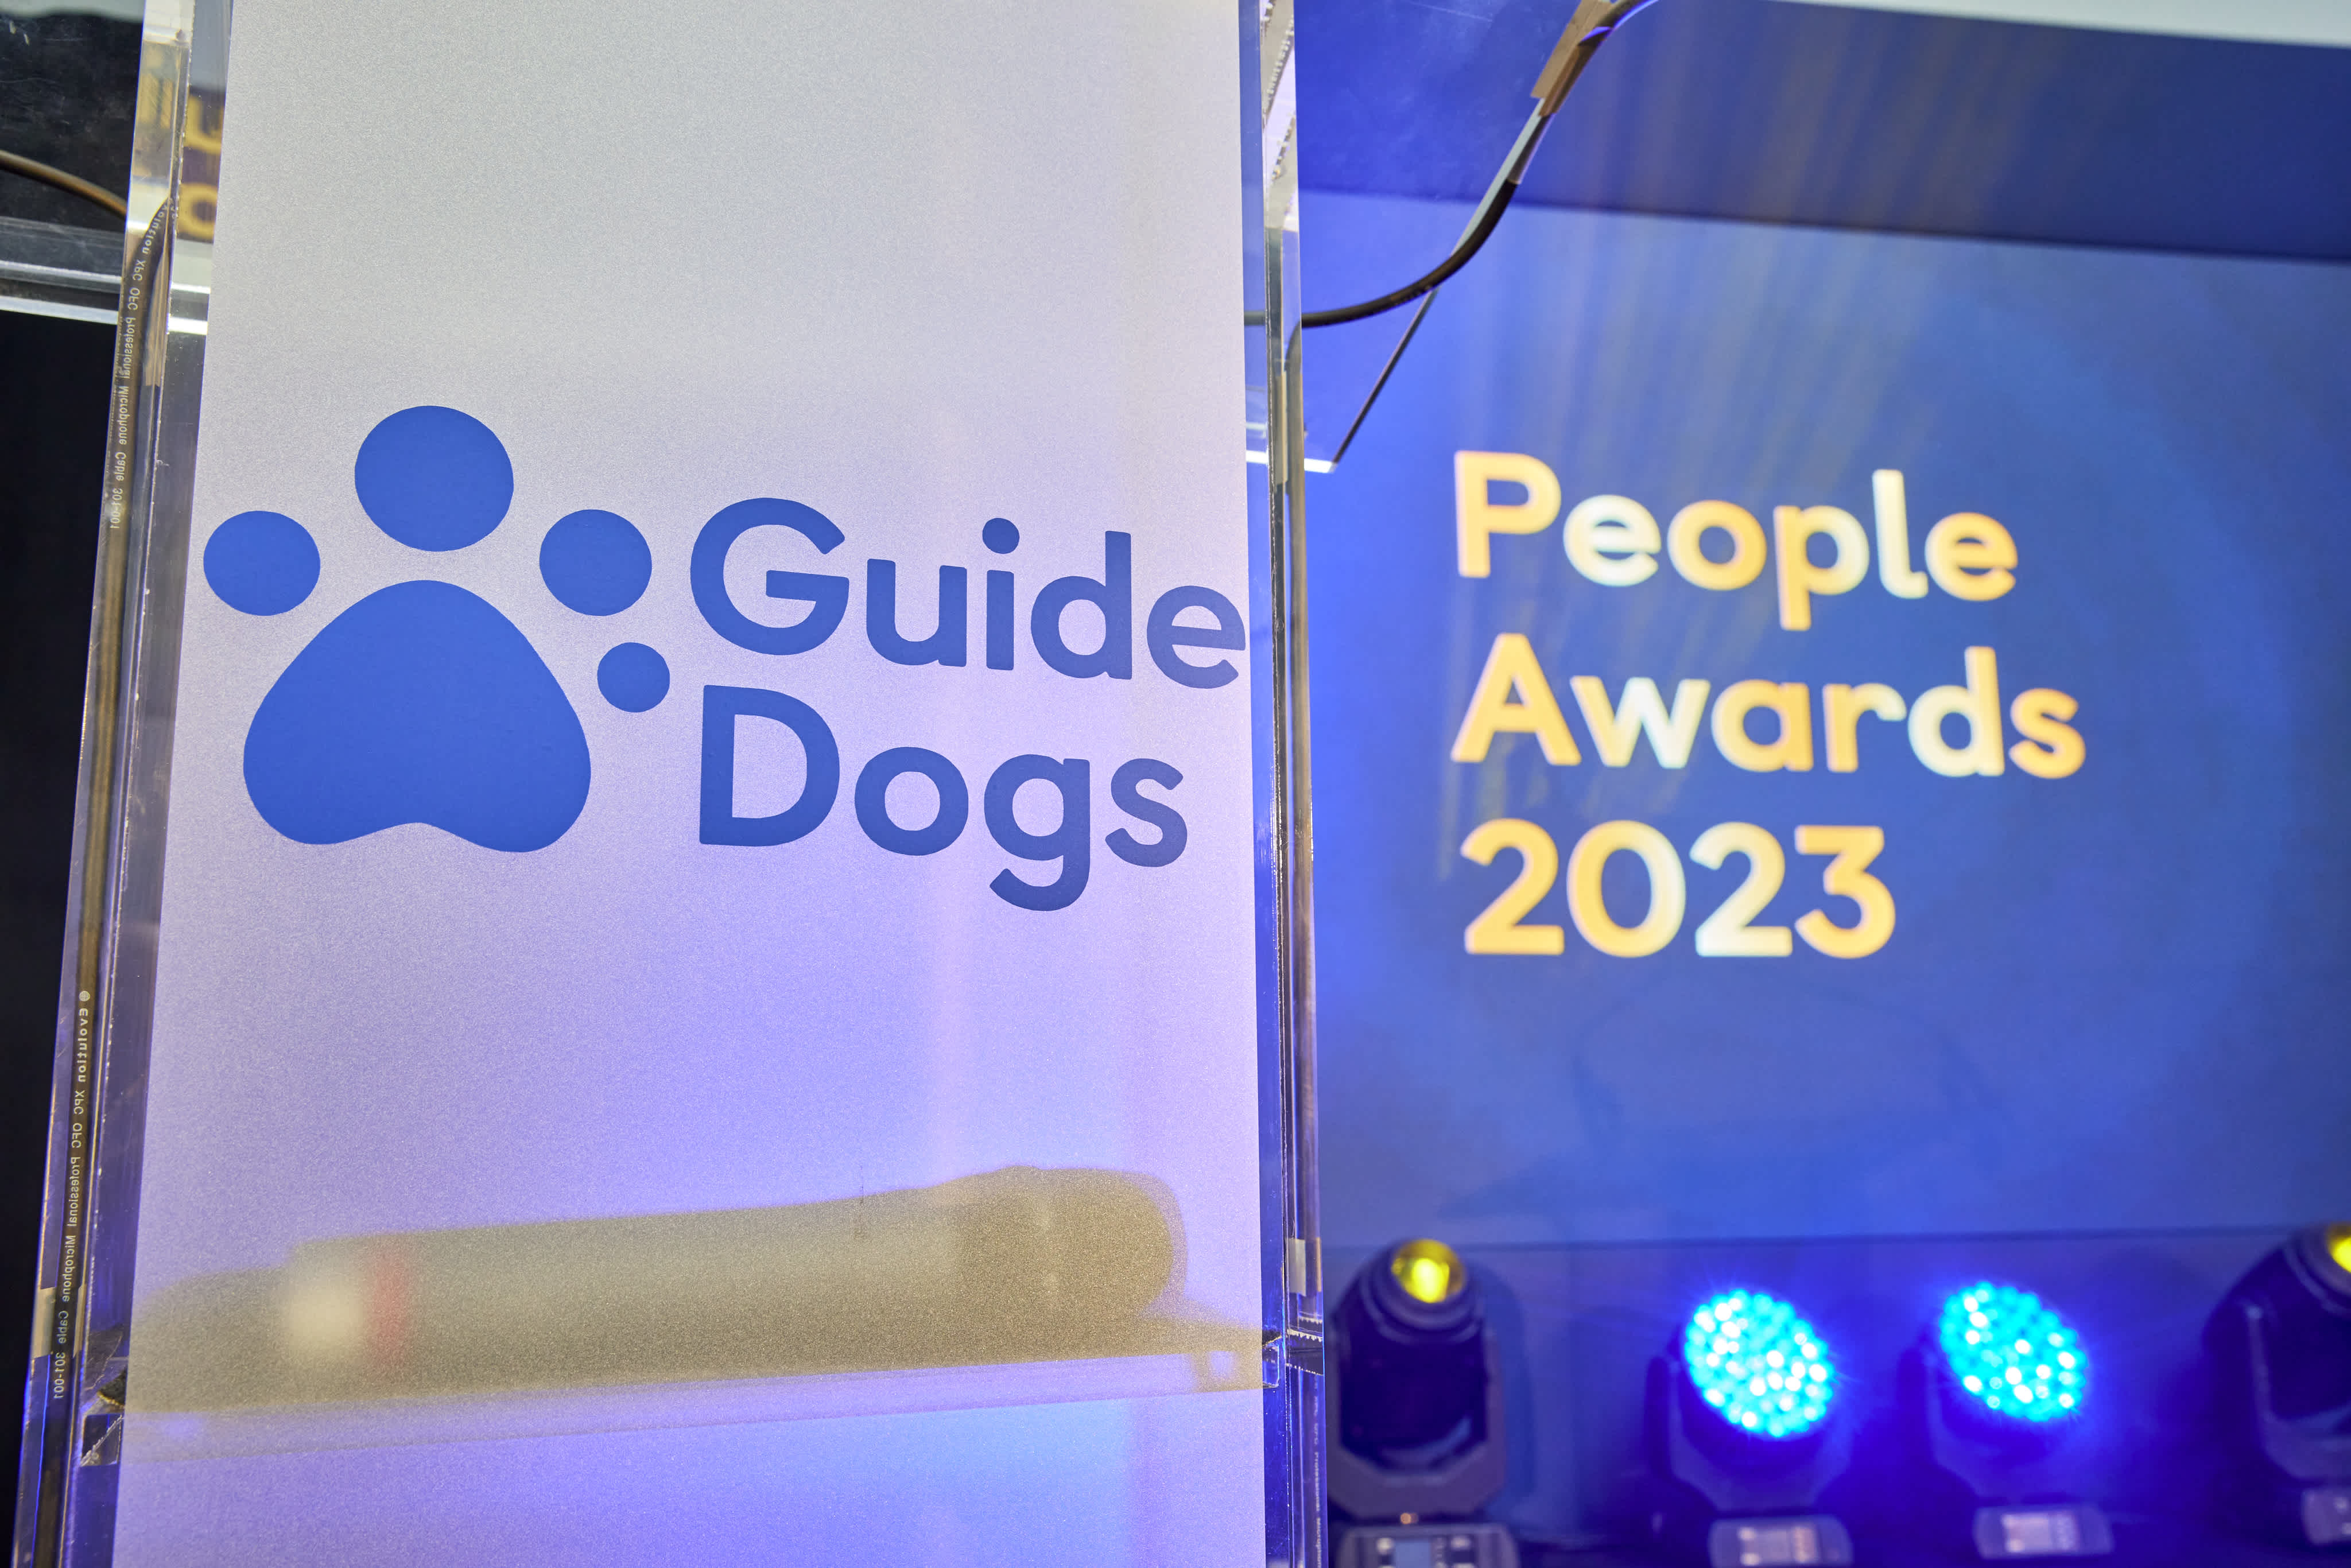 Guide Dogs People Awards stage